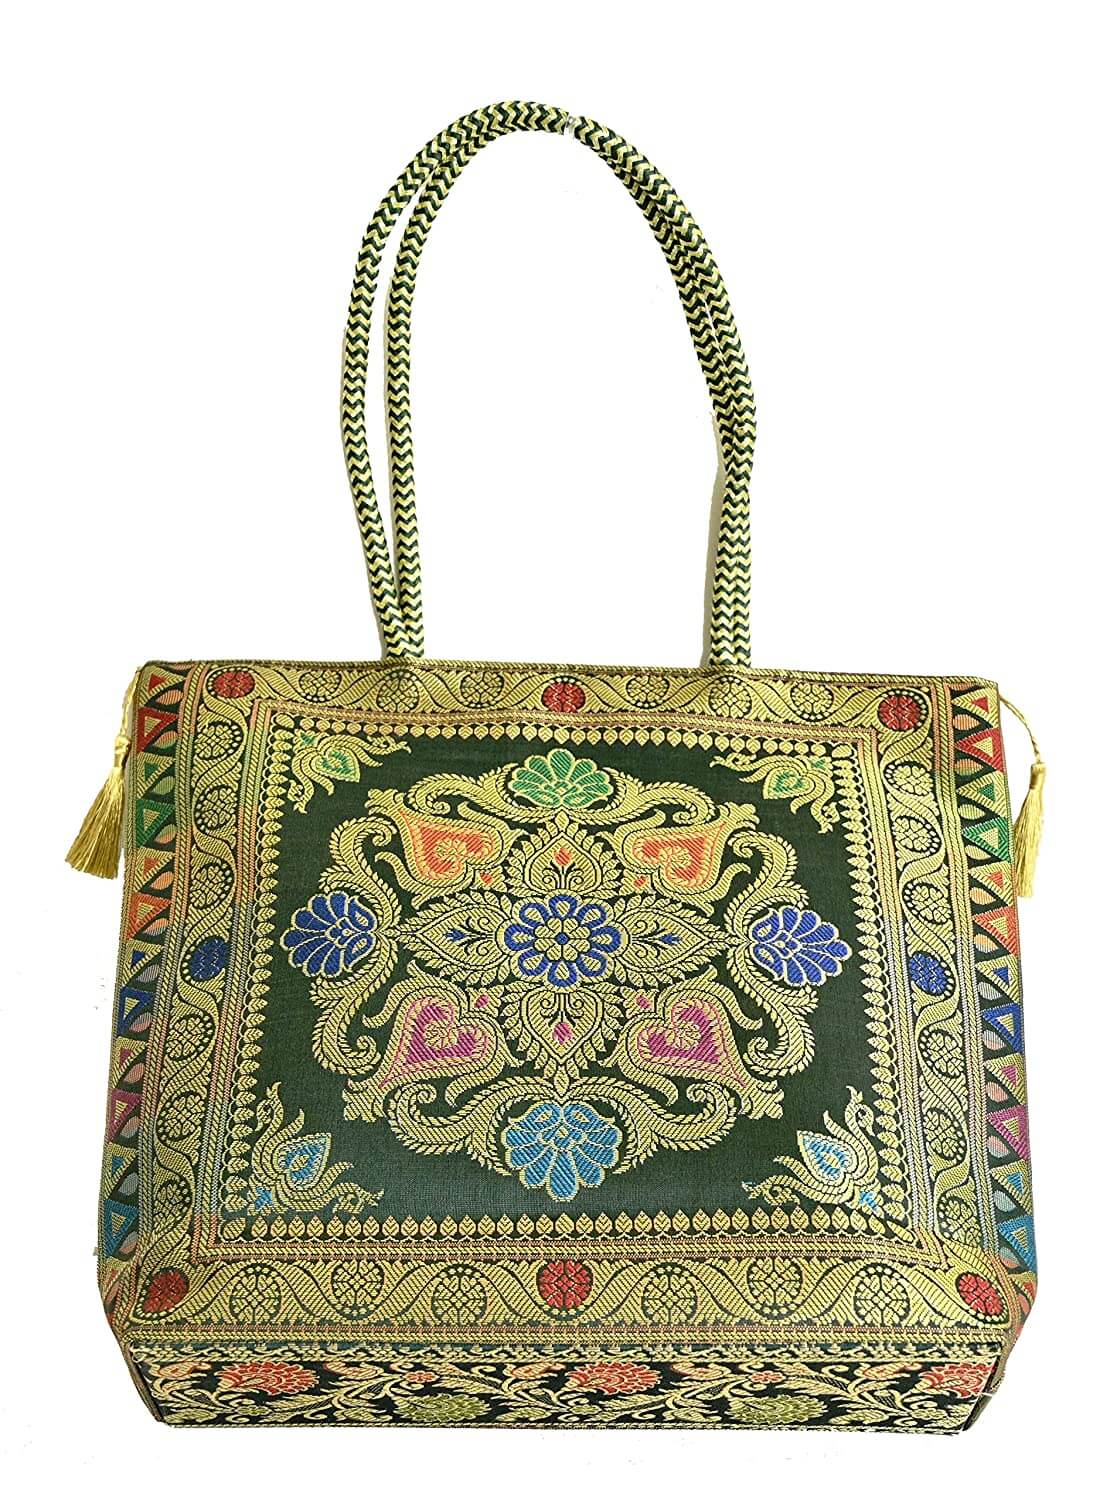 Embroidery Silk Handicraft Hand Bag, Shoulder, Tote Bag For Ladies (13 x 11.5 x 7.5 Inches, Rangoli, Dark Green (Kai Color)) Mangal Fashions | Indian Home Decor and Craft